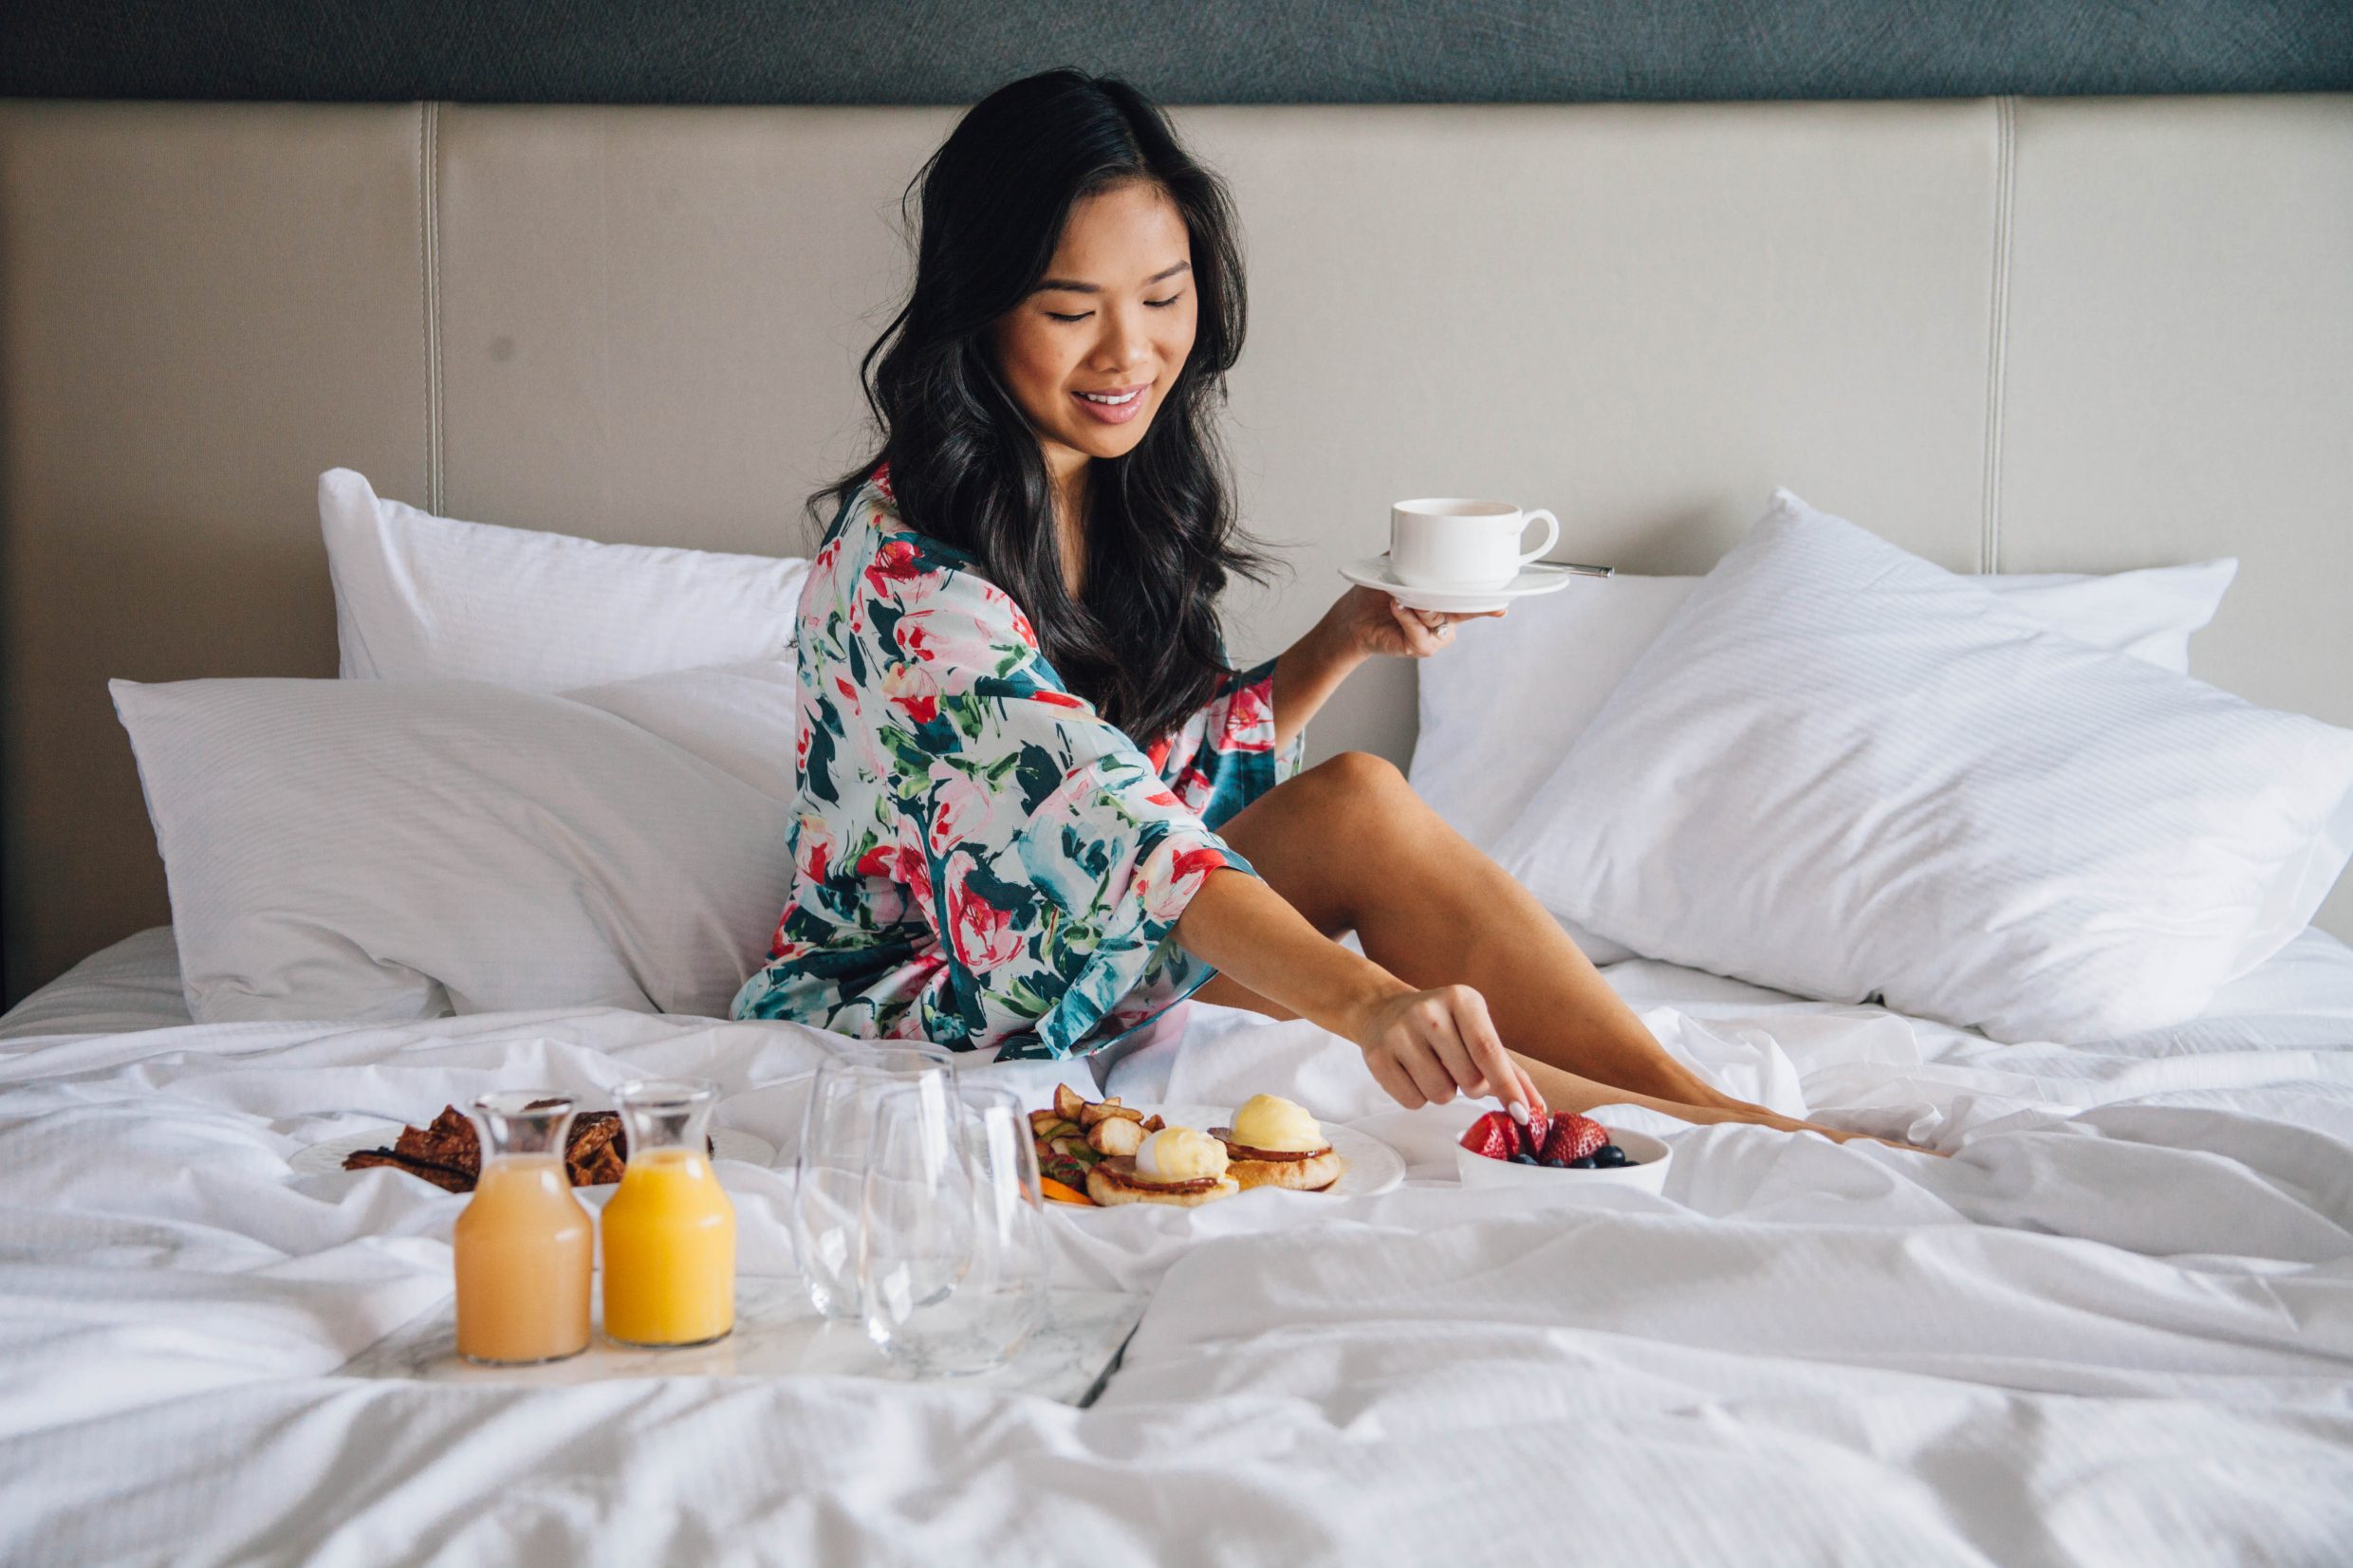 COLOR & CHIC | A staycation at Hilton Norfolk The Main - breakfast in bed